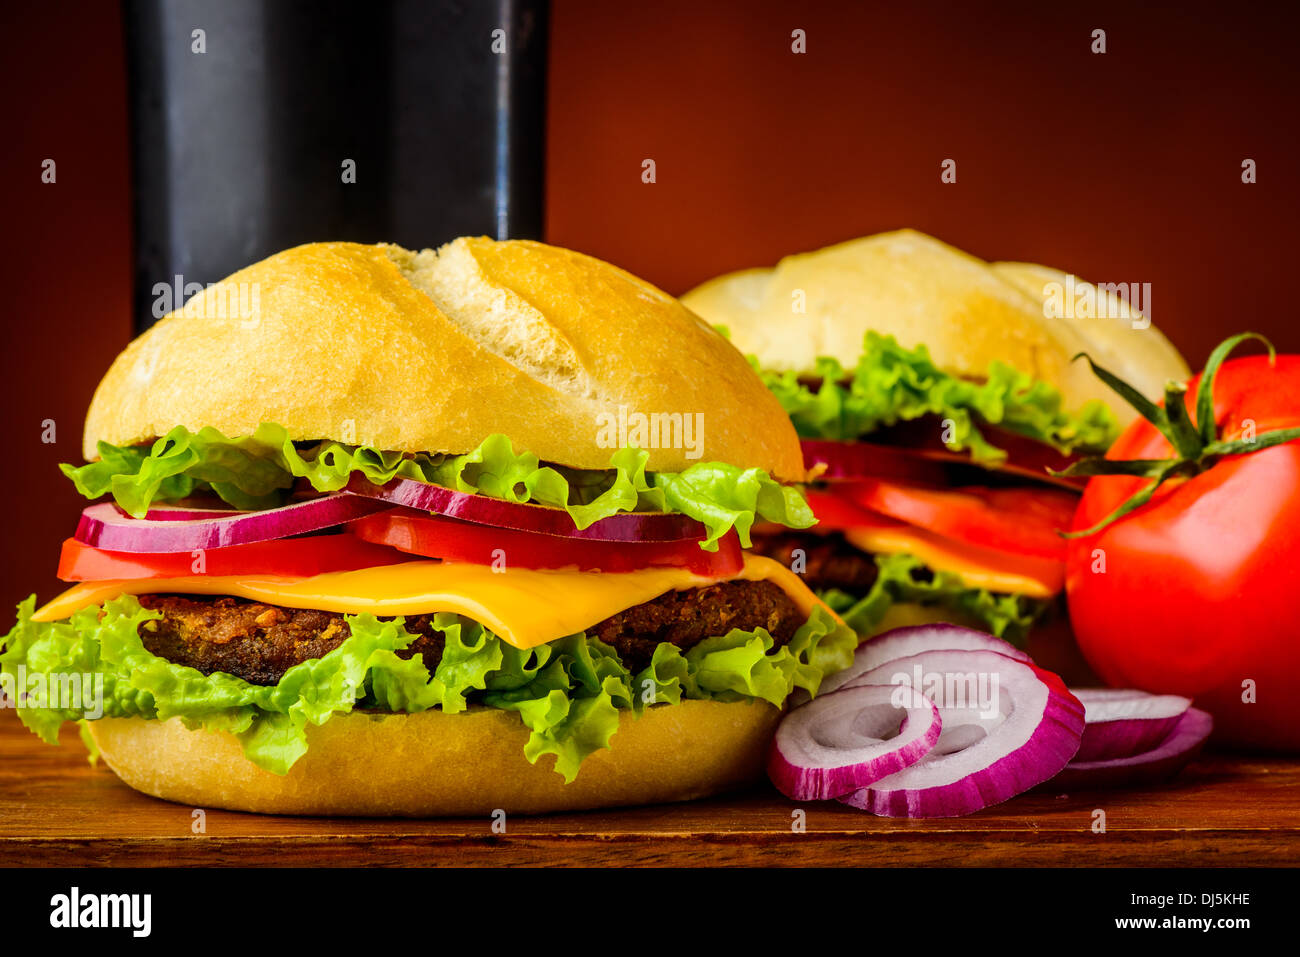 still life with traditional american cheeseburger and onion rings Stock Photo